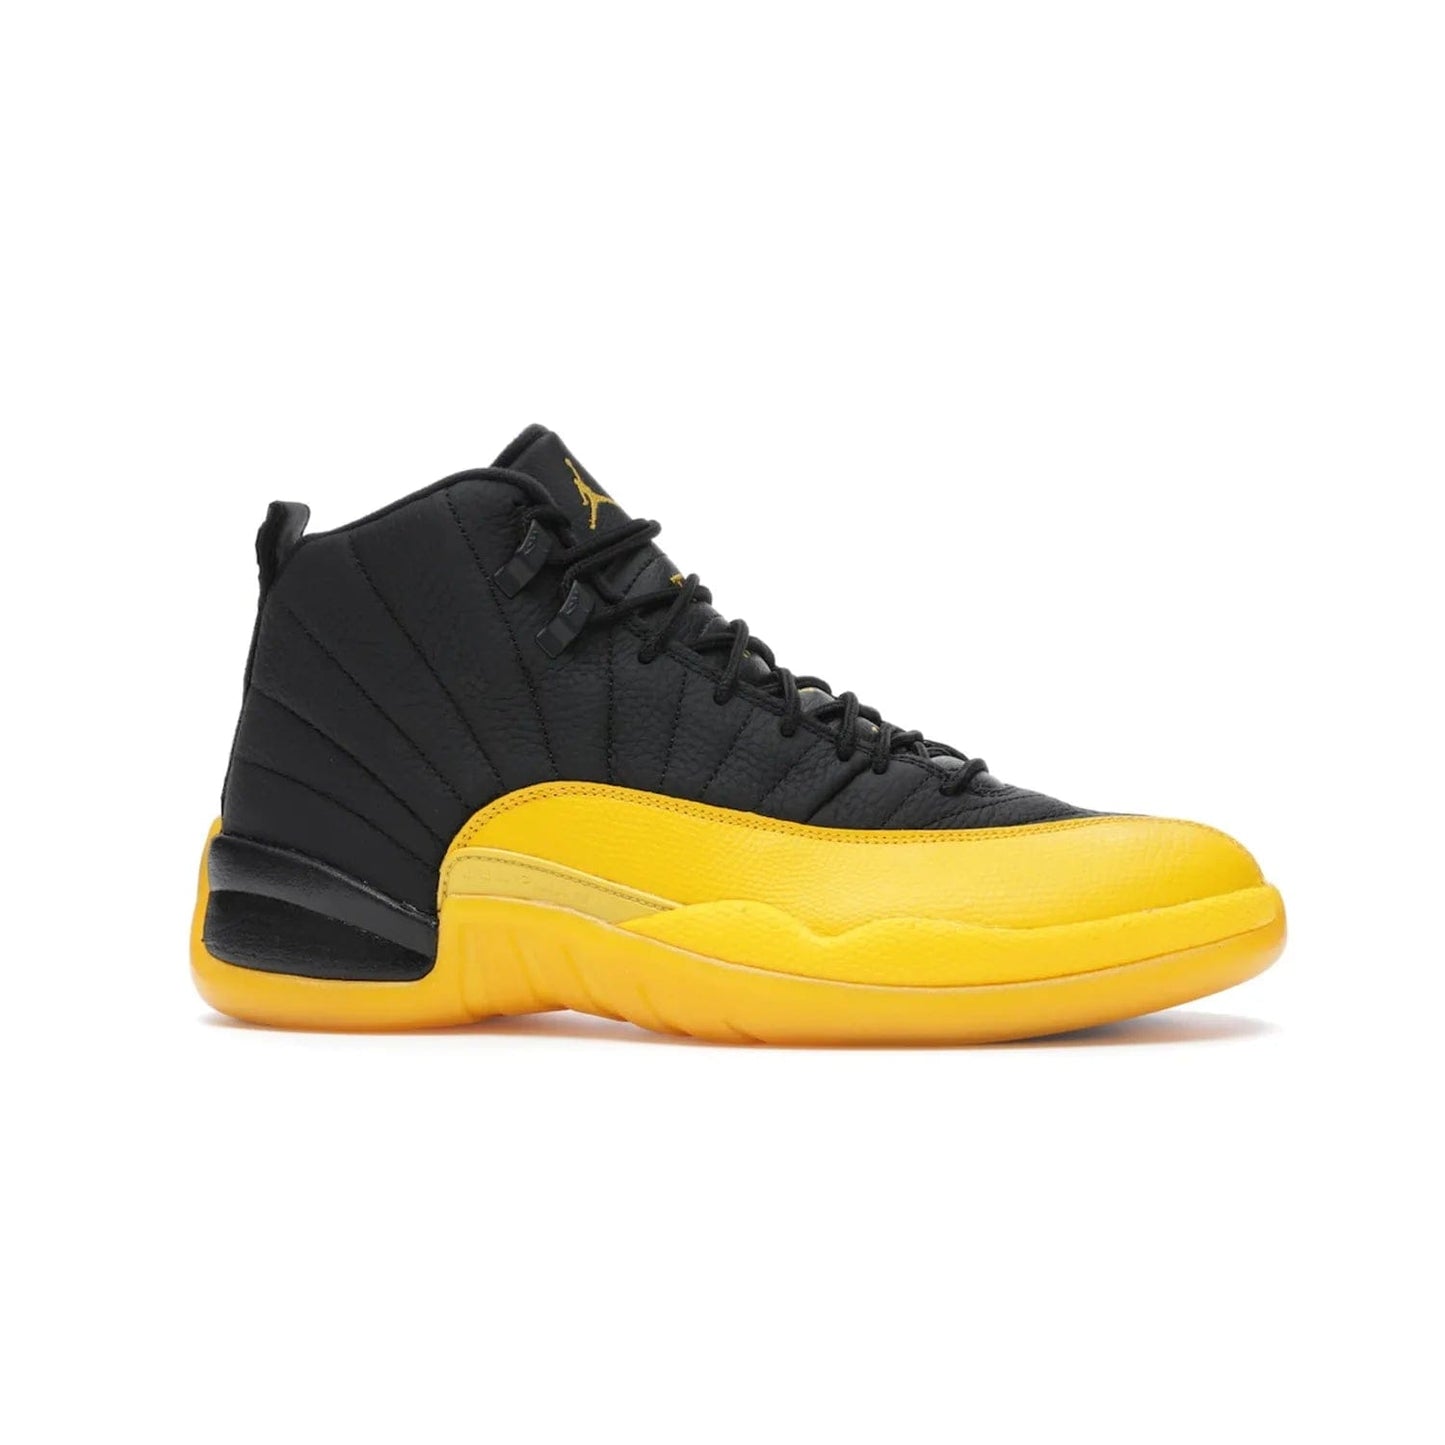 Jordan 12 Retro Black University Gold - Image 2 - Only at www.BallersClubKickz.com - This Jordan 12 Retro features a black tumbled leather upper and University Gold accents for a modern twist. Boasting Jordan "Two Three" branding and a yellow sole, these shoes will elevate your wardrobe. Fresh, sleek, and one of a kind - the Jordan 12 University Gold is your summer sneaker.